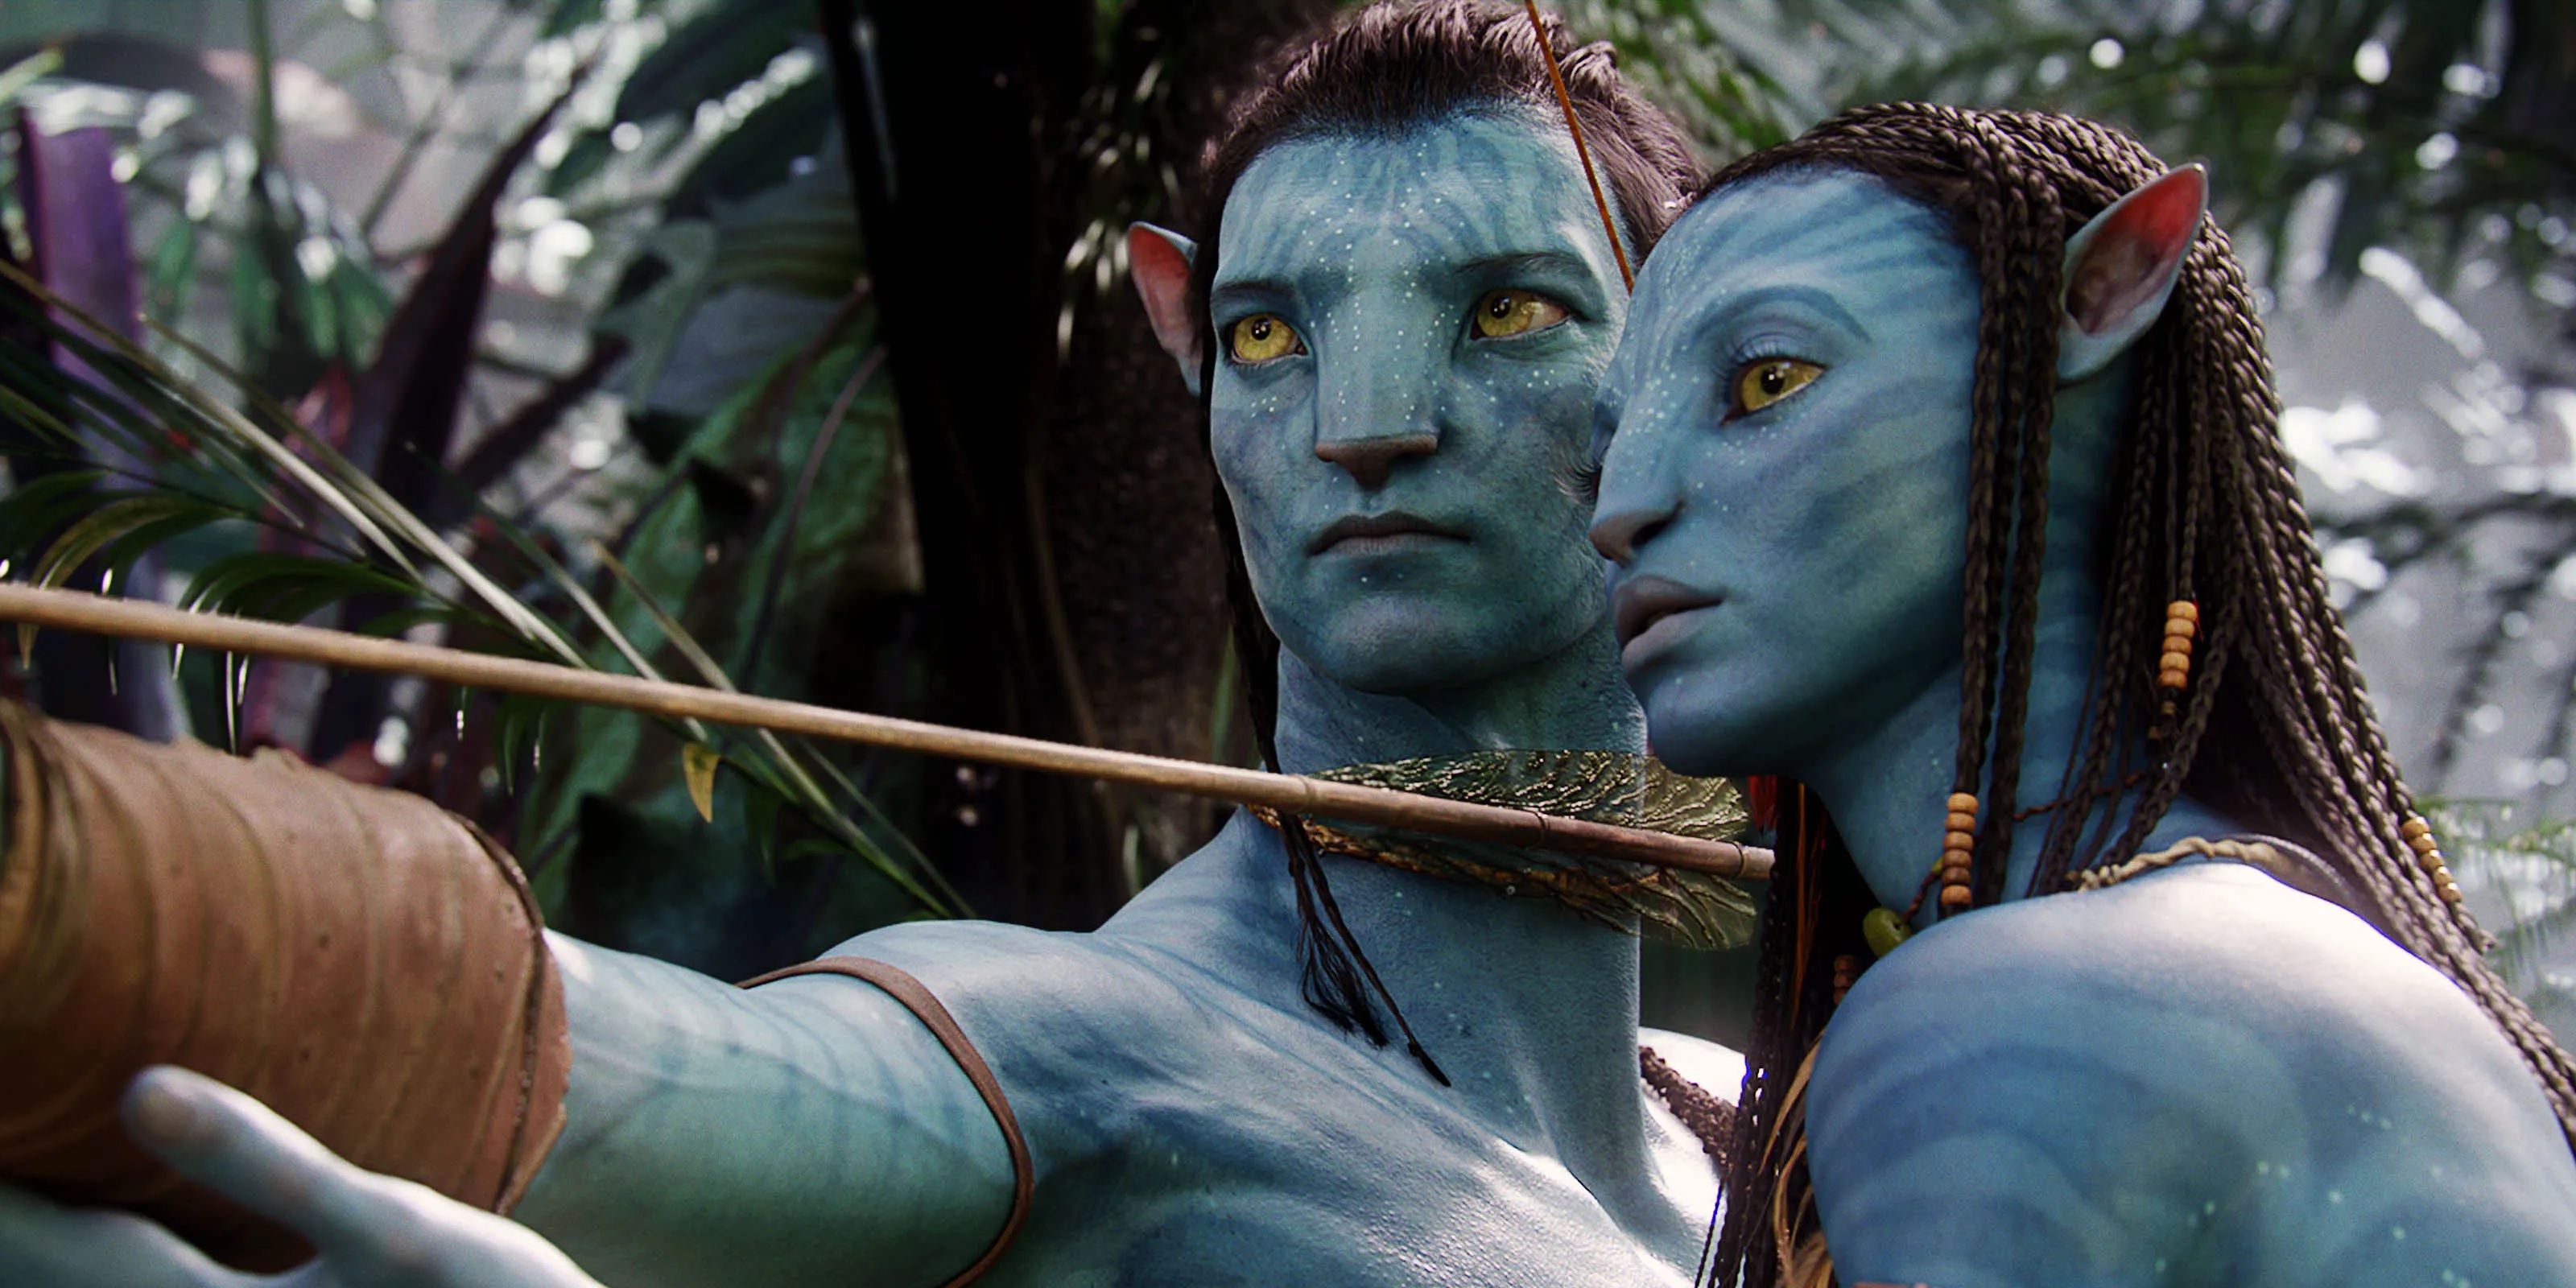 jake and neytiri using a bow and arrow in avatar 1